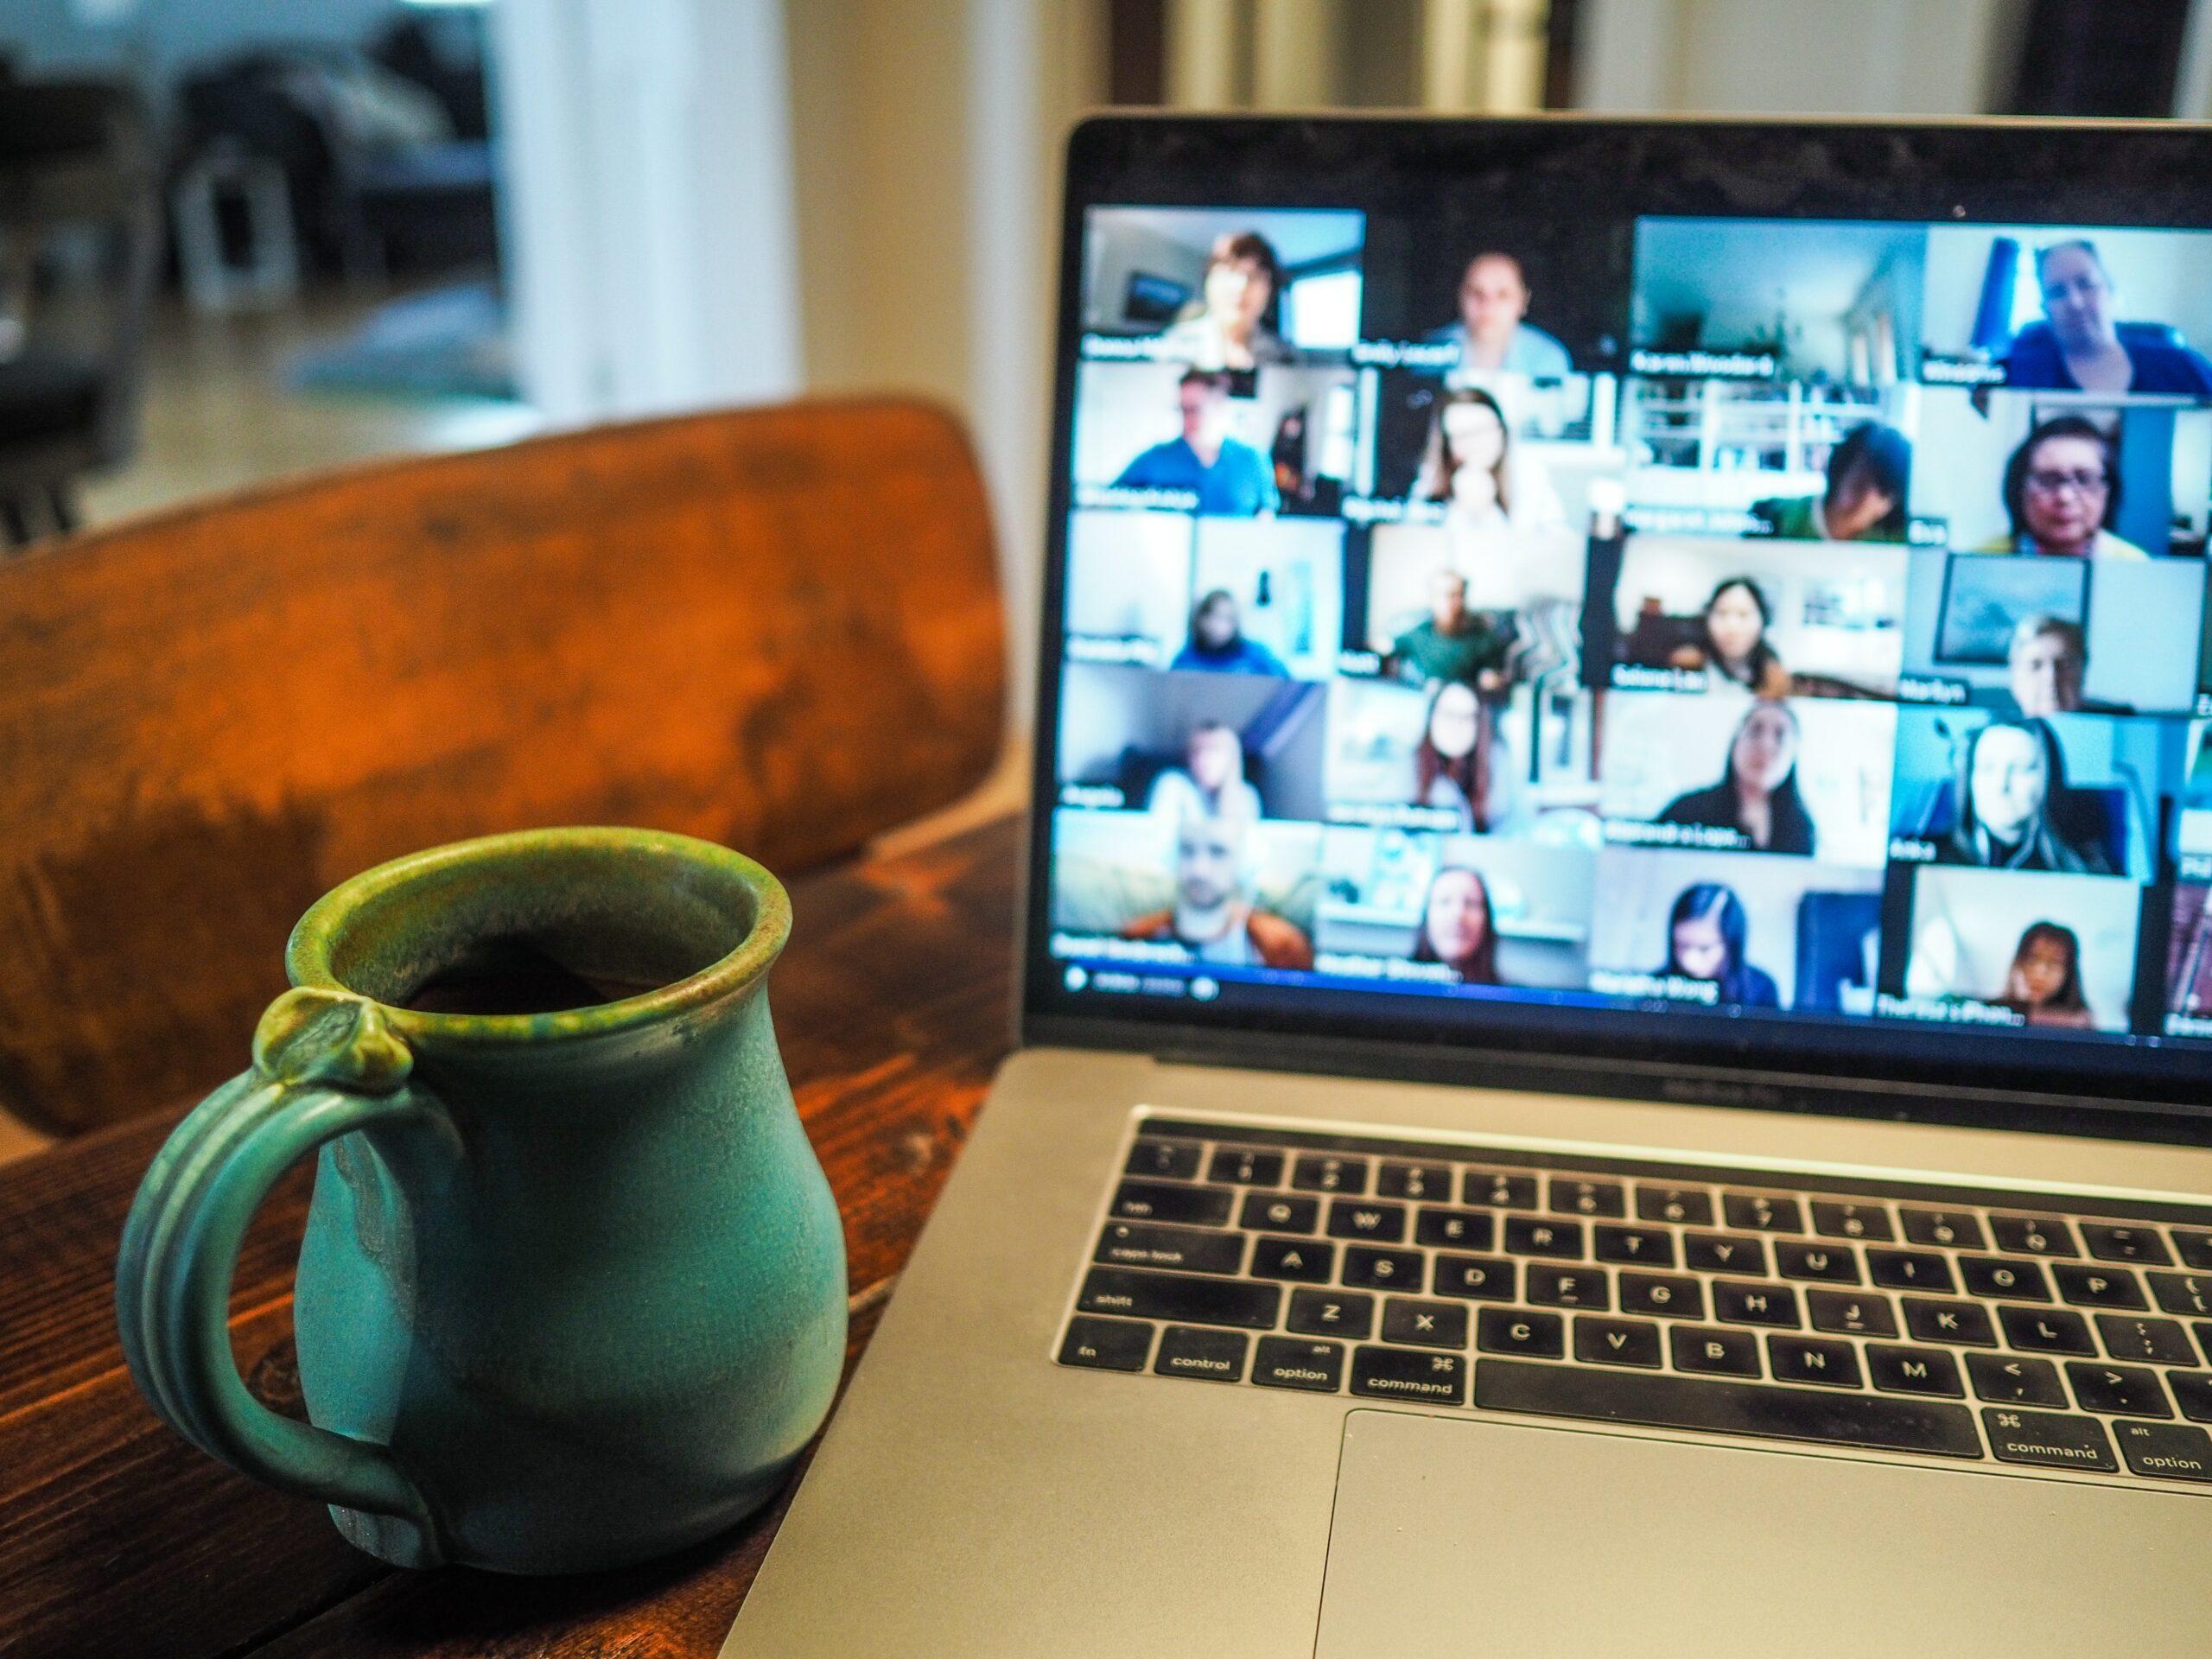 MacBook pro displaying an online meeting with a group of people